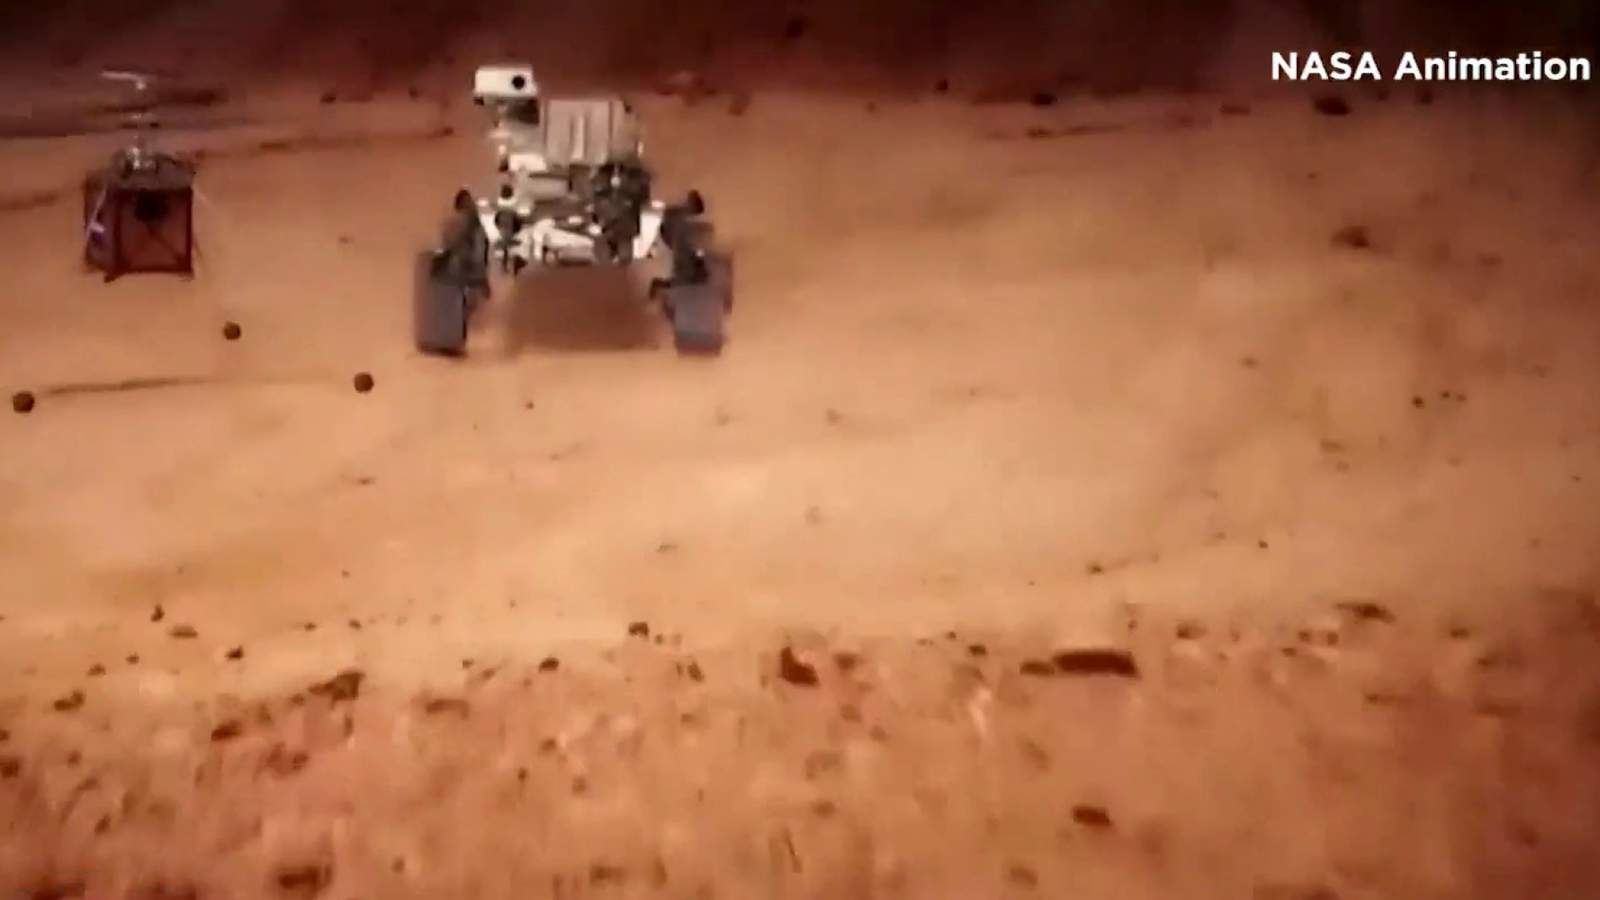 ‘Touchdown confirmed’ NASA rover, helicopter duo land on Mars